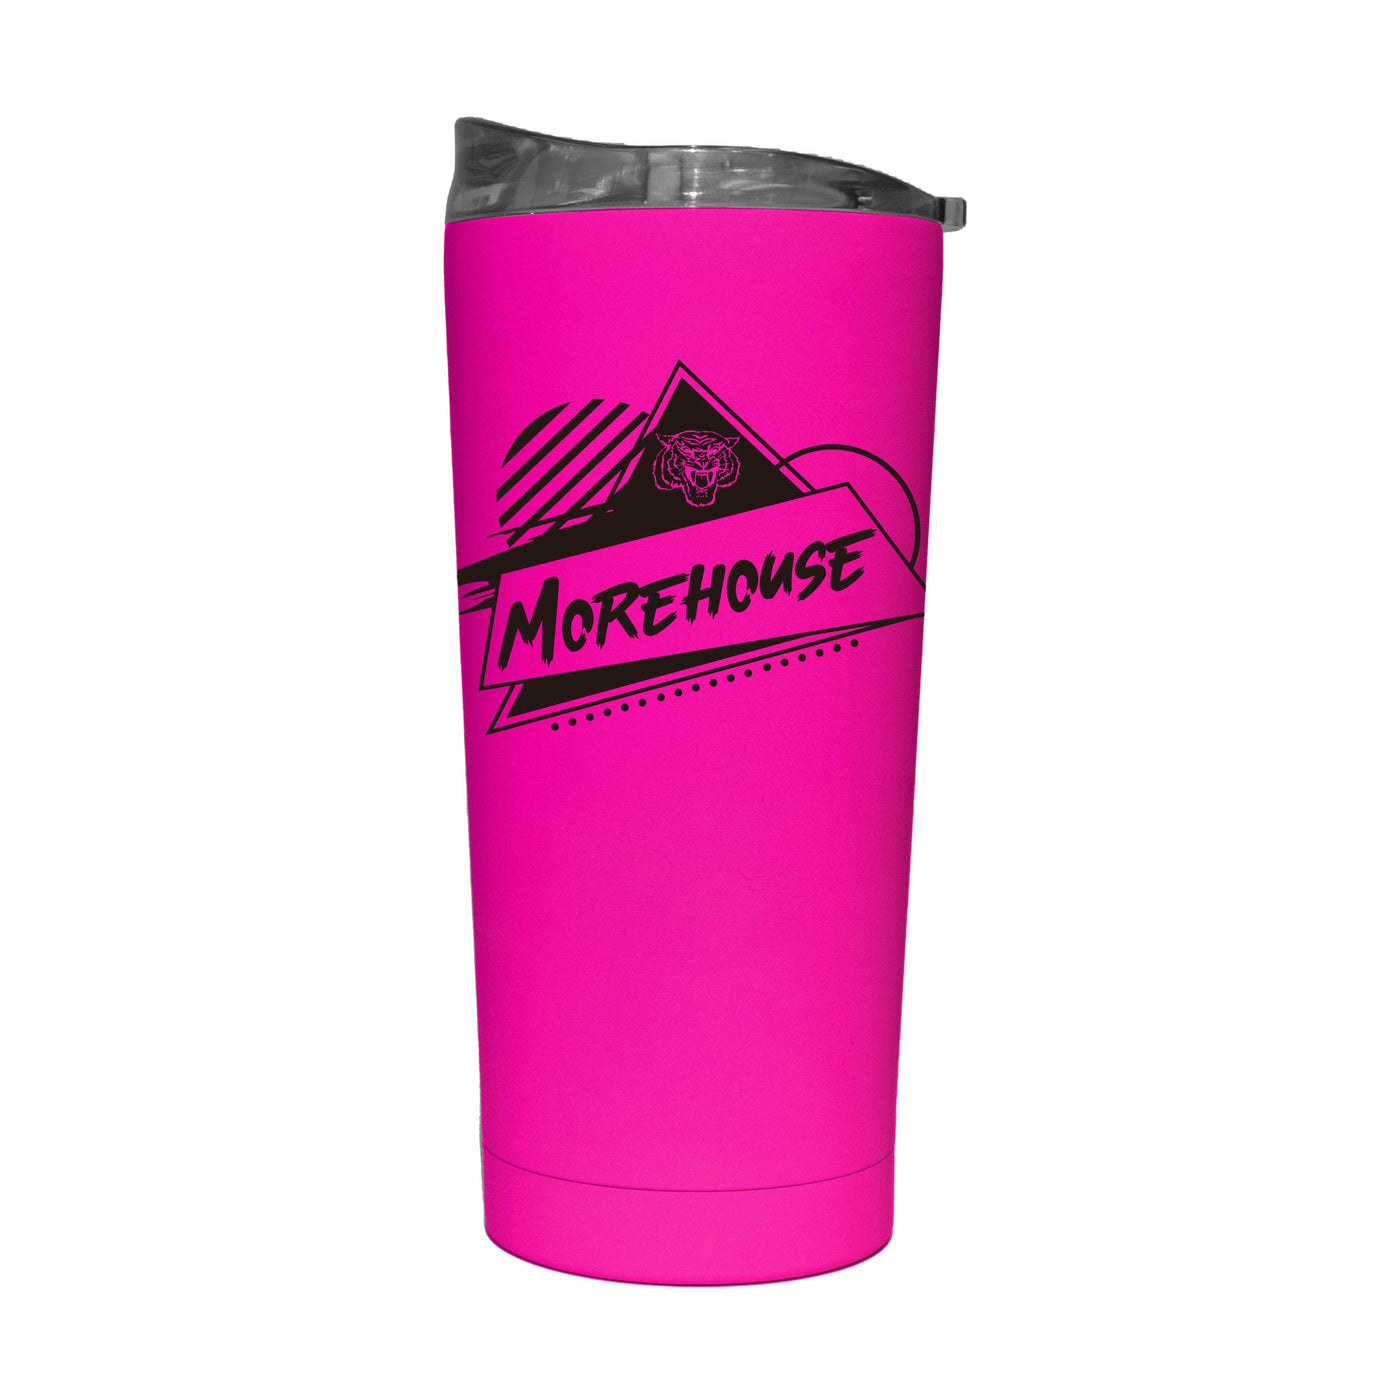 Morehouse 20oz Electric Rad Soft Touch Tumbler